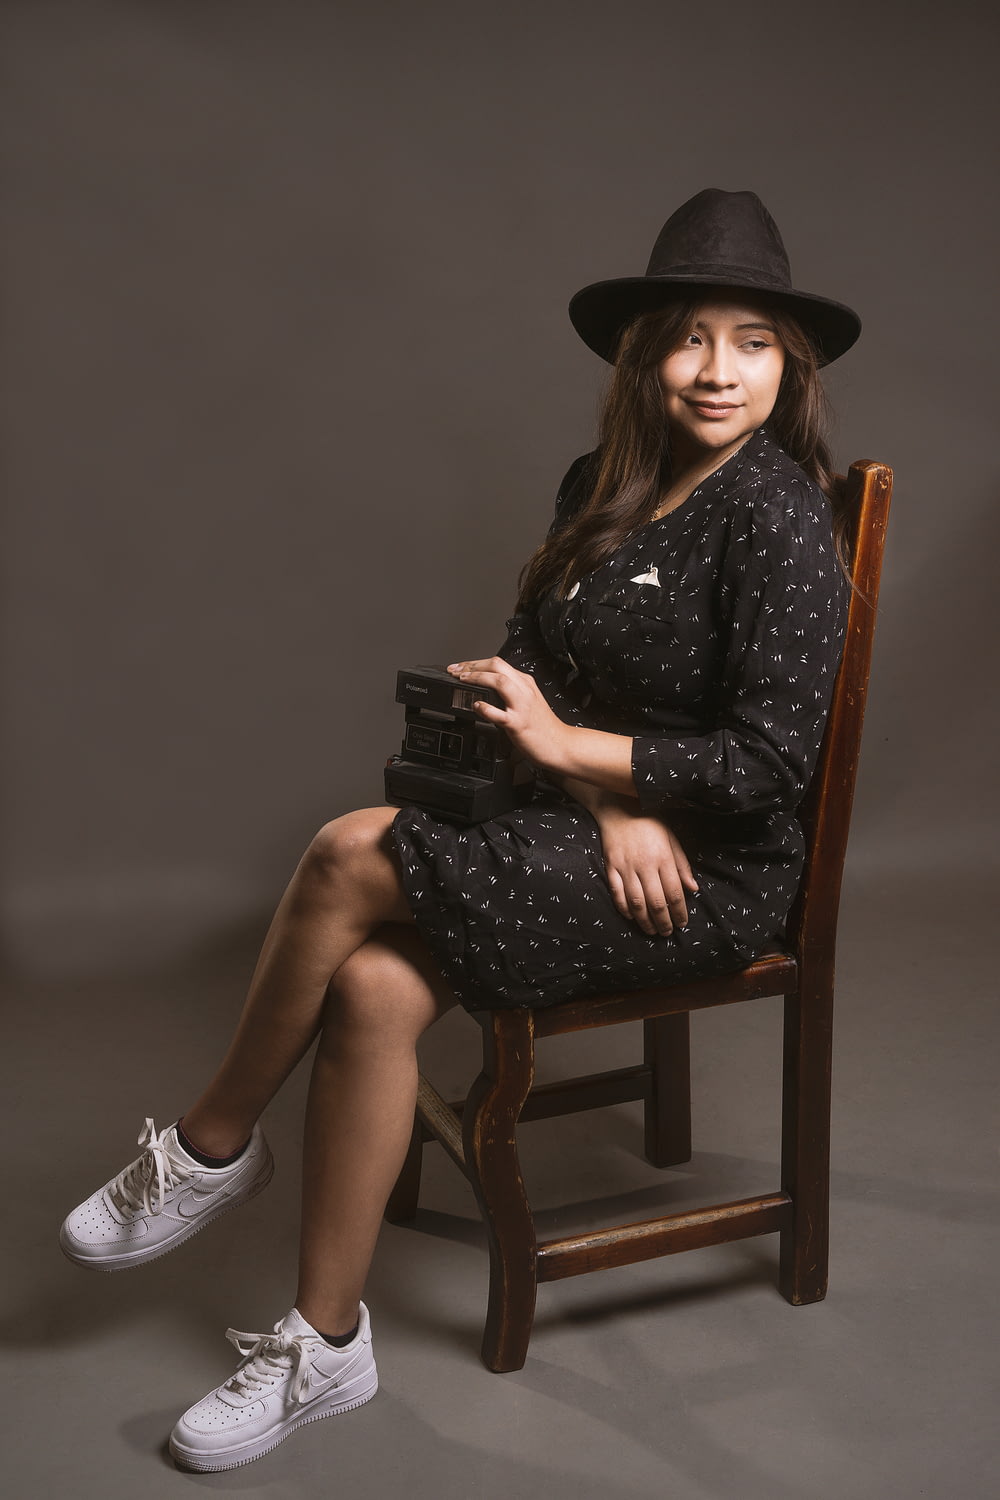 a girl in a black dress and hat sitting on a chair